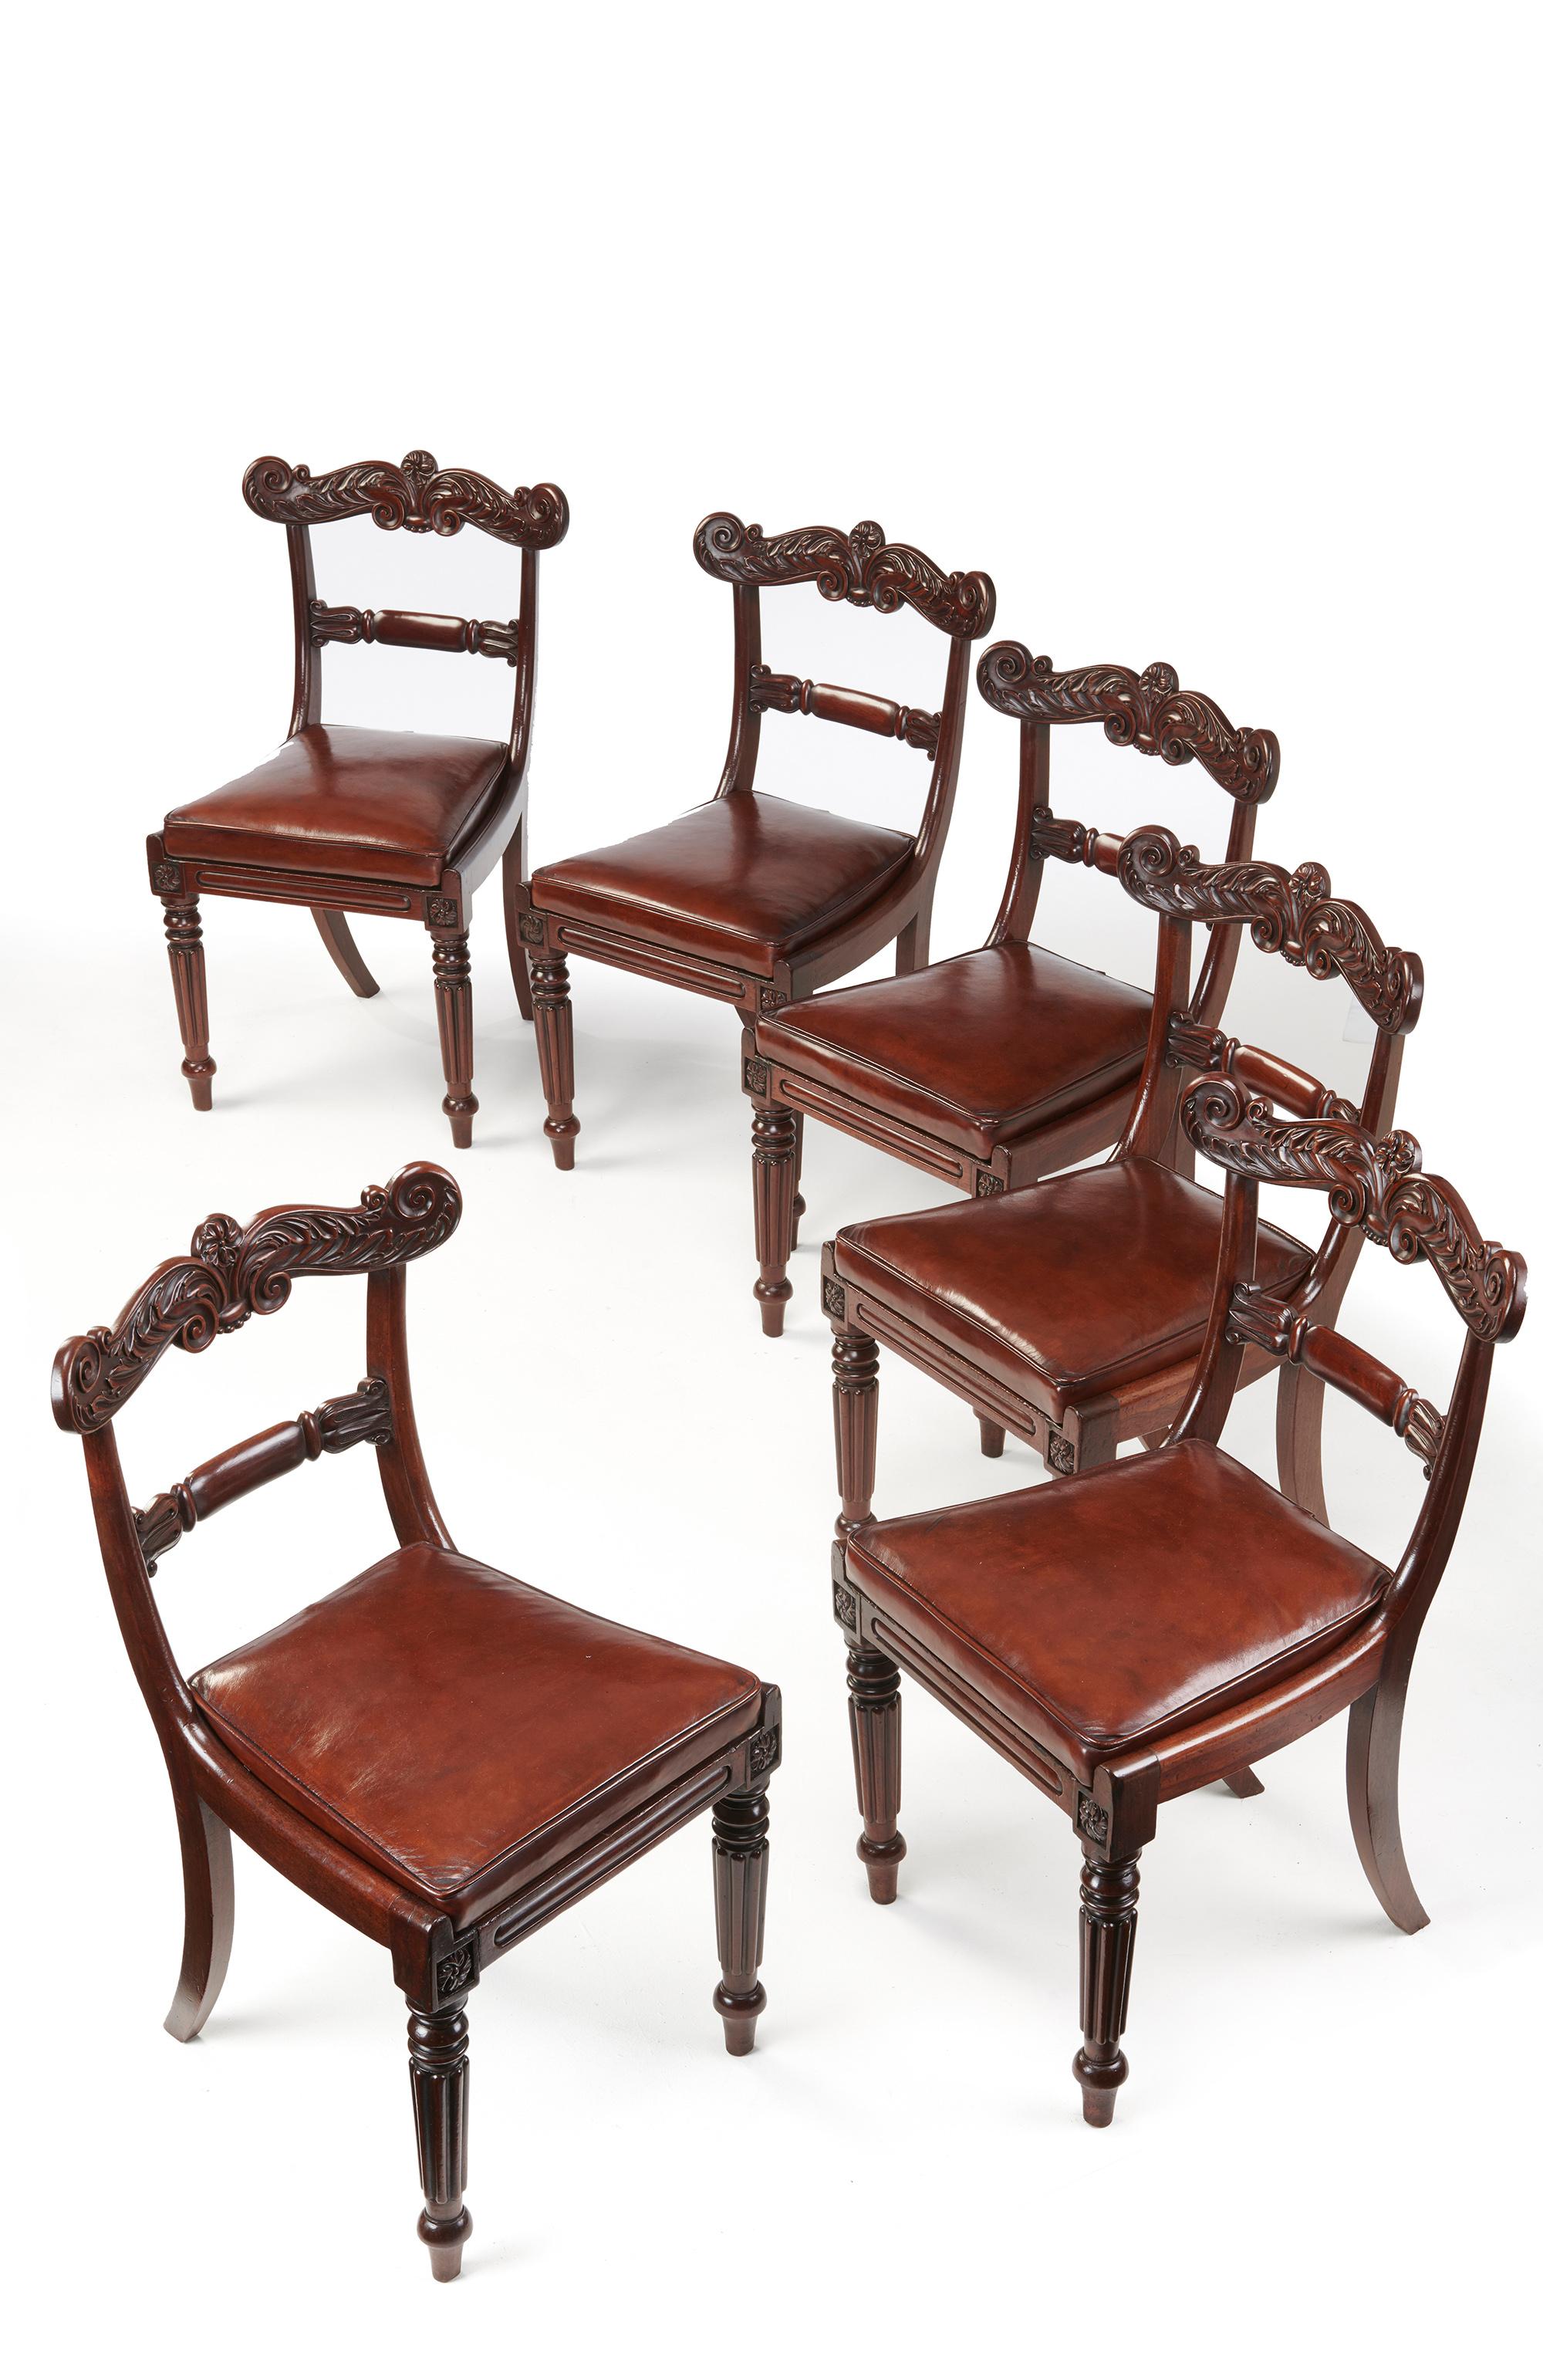 English Set of Six William IV Mahogany and Leather Dining Chairs